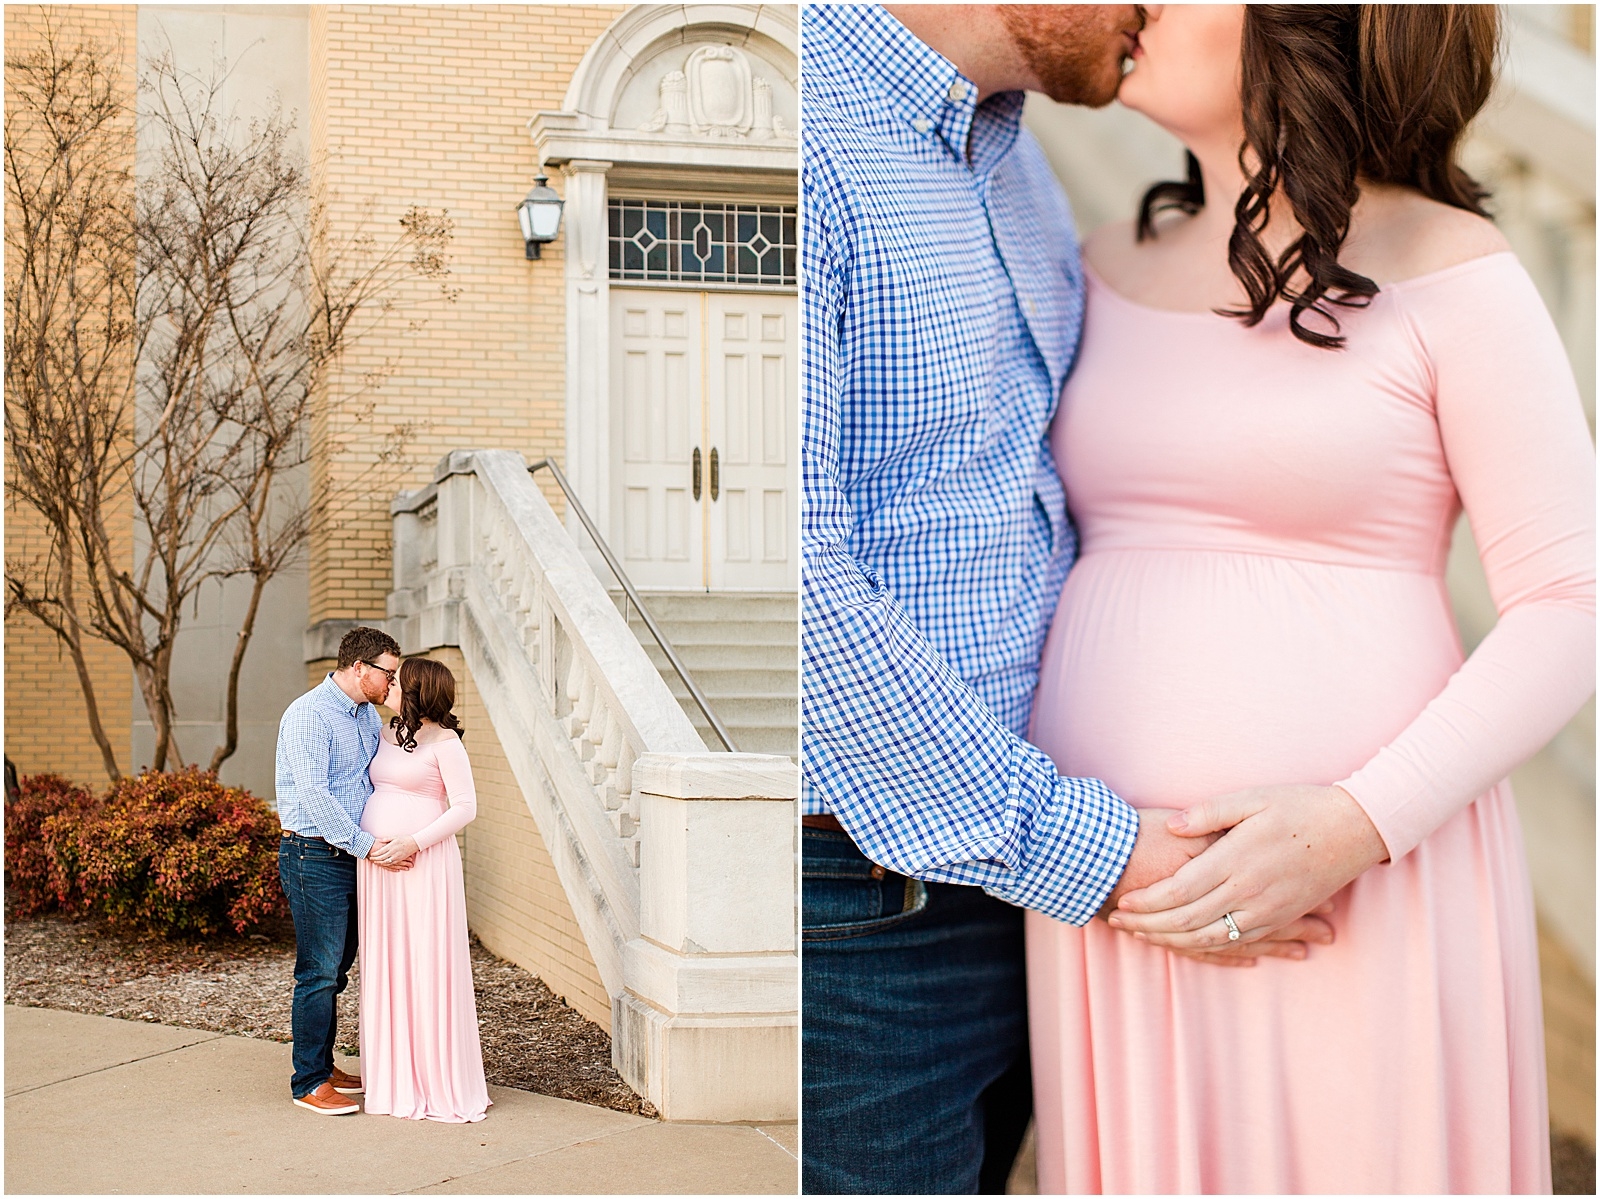 A Downtown Owensboro Maternity Session | Kayla and Grant Evansville Indiana Wedding Photographers-0025.jpg